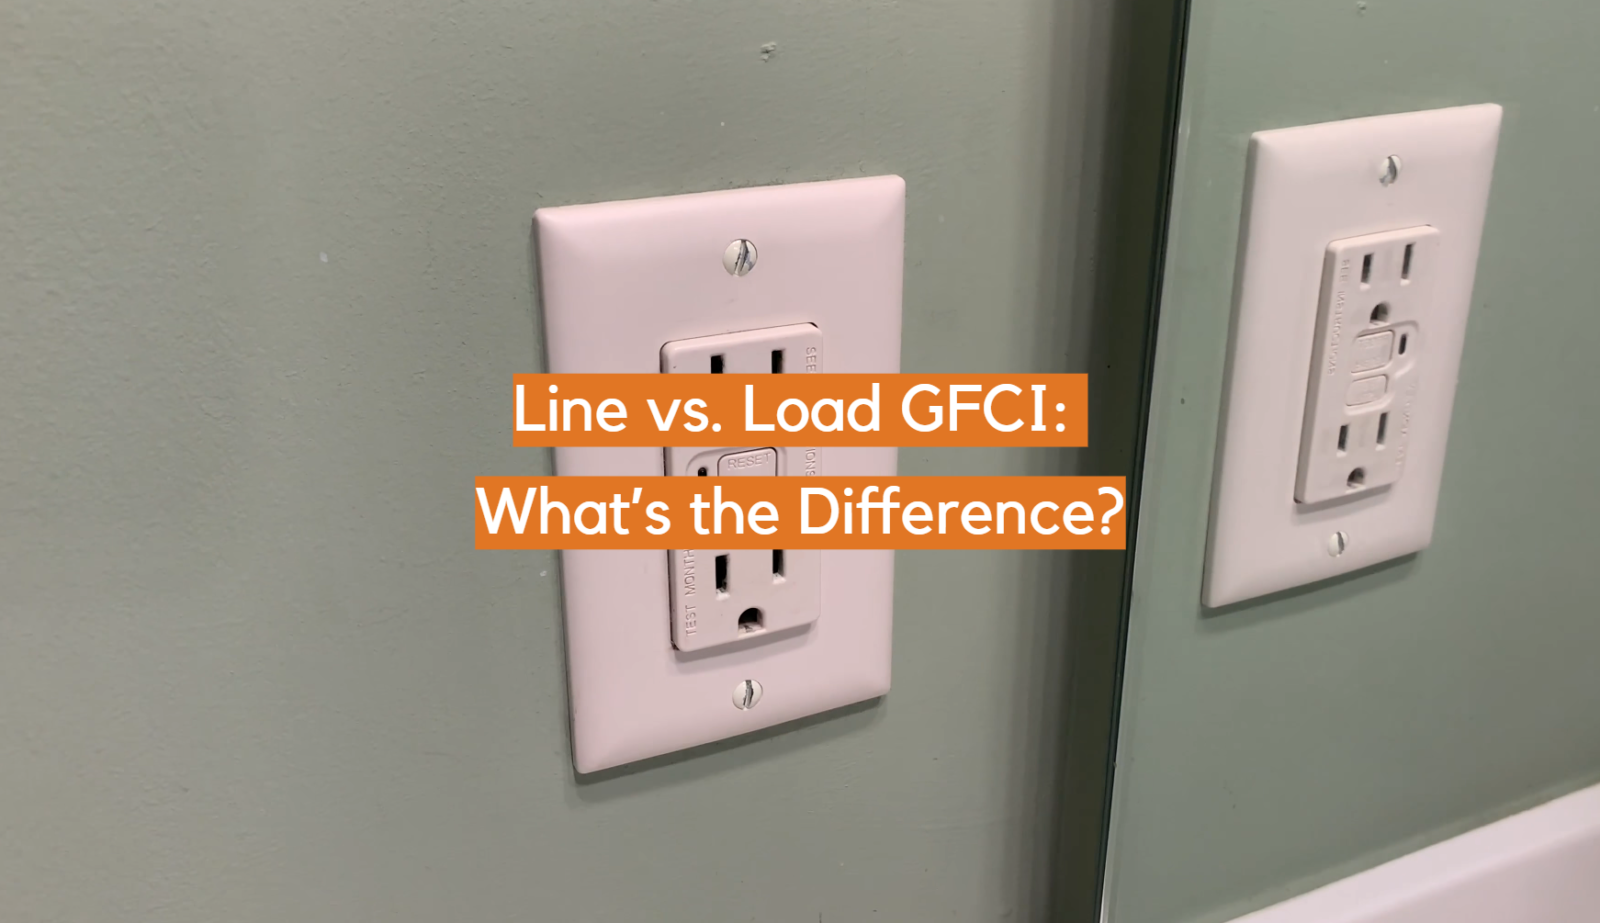 Line vs. Load GFCI: What’s the Difference?